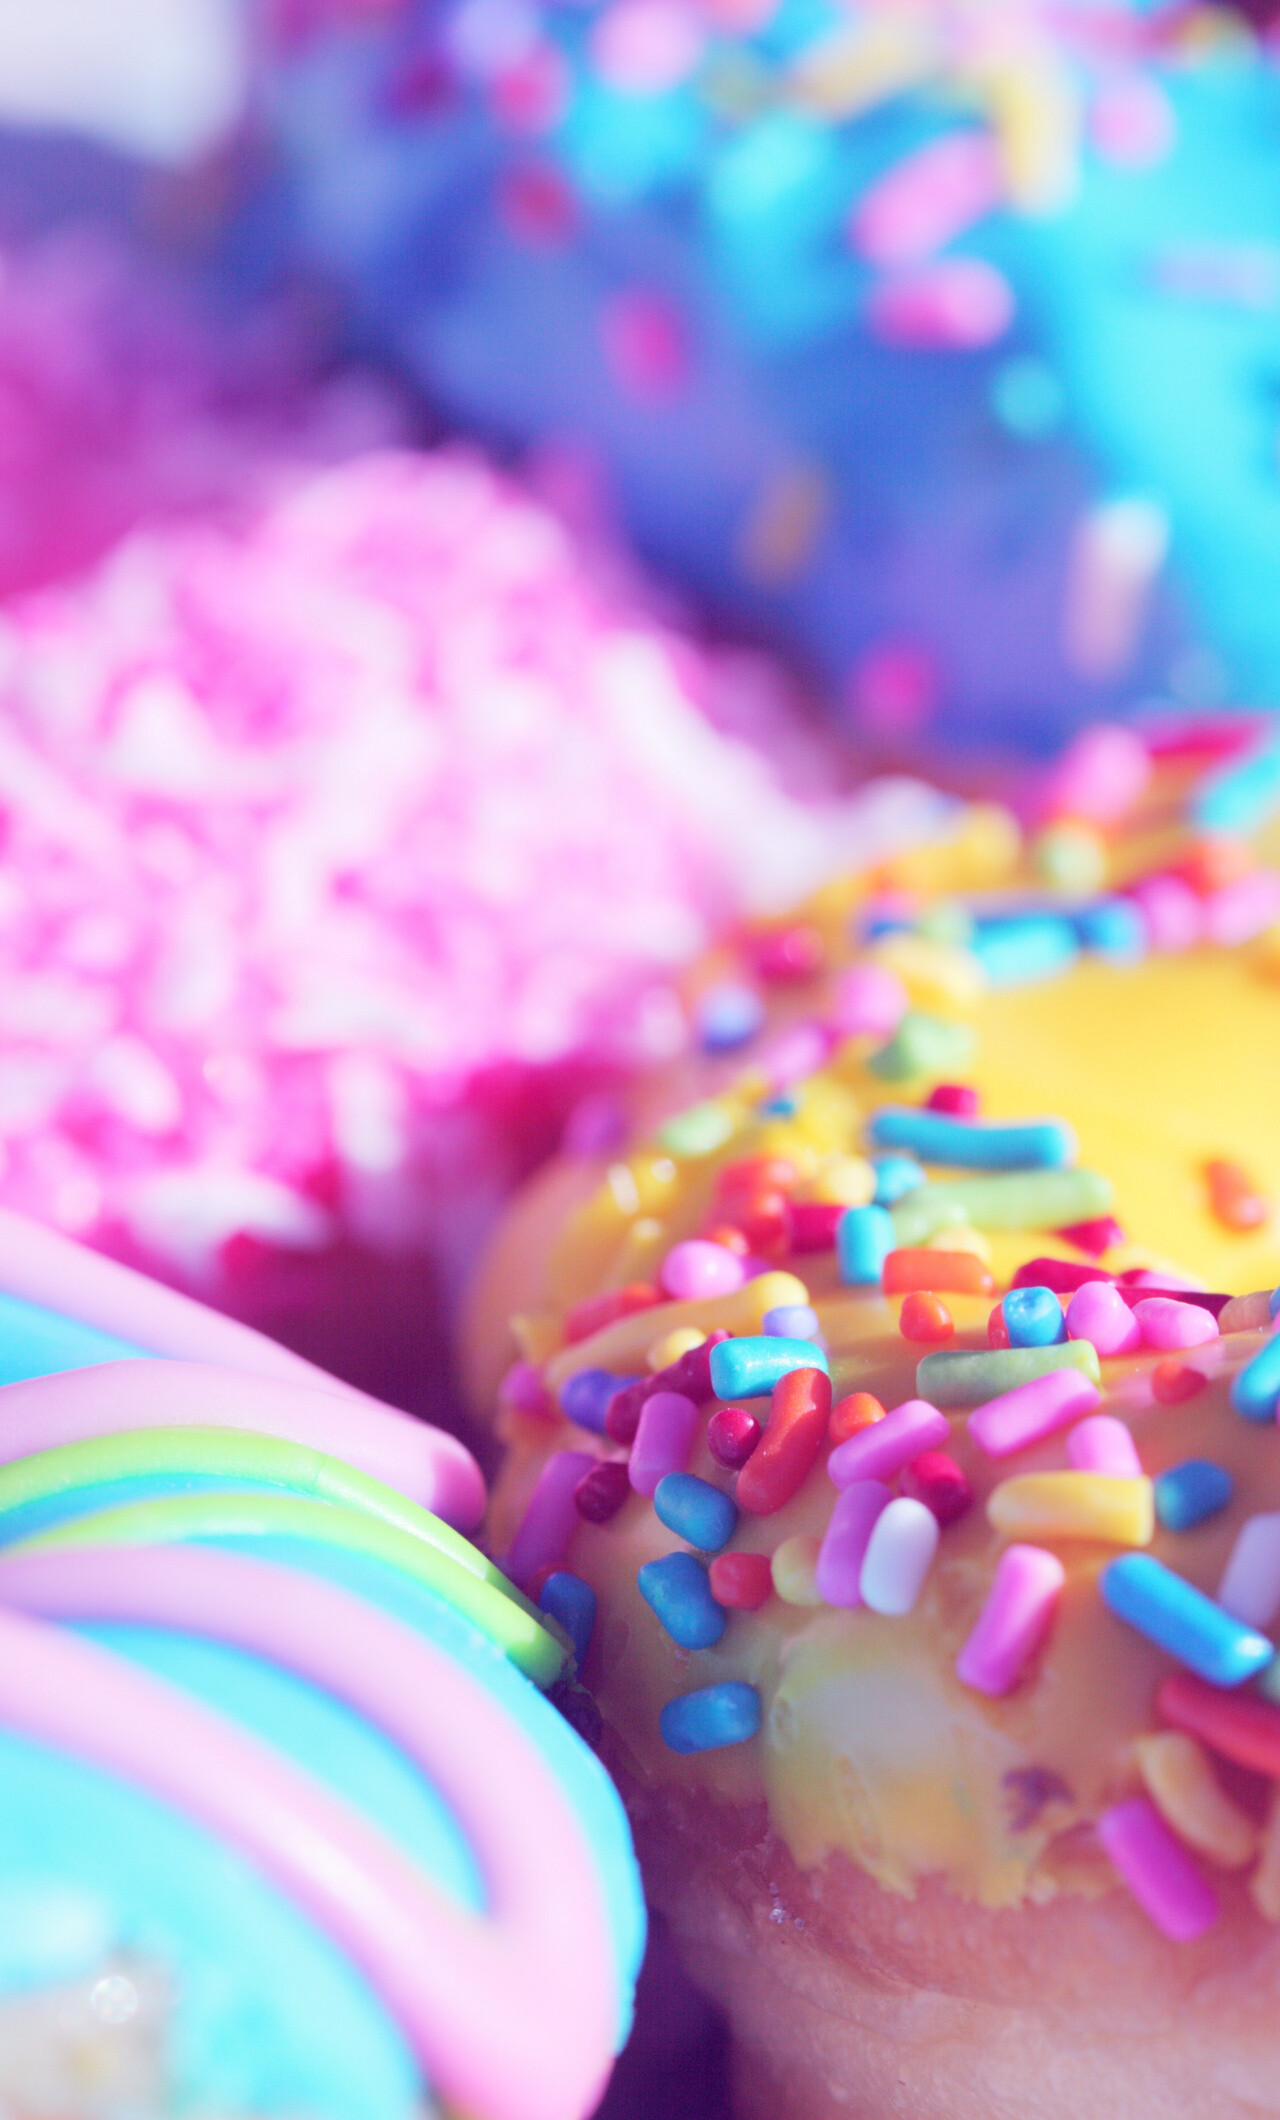 Baked colorful sweets, Close-up of doughnut, Tempting iPhone wallpaper, Tasty treat, 1280x2120 HD Phone